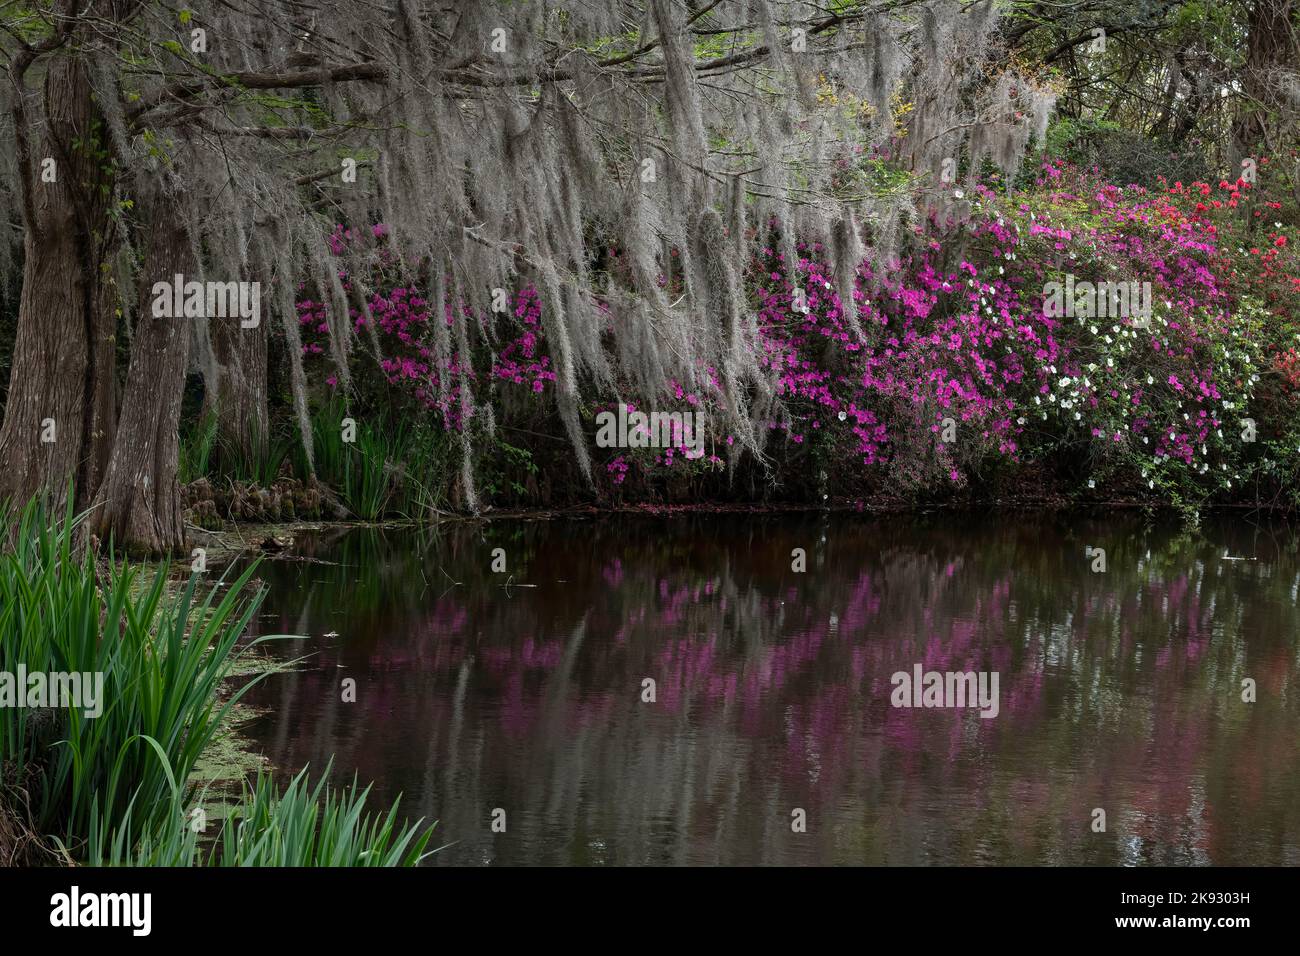 Live oaks dripping in Spanish moss in front of a pond with blooming azaleas reflected in the water Stock Photo